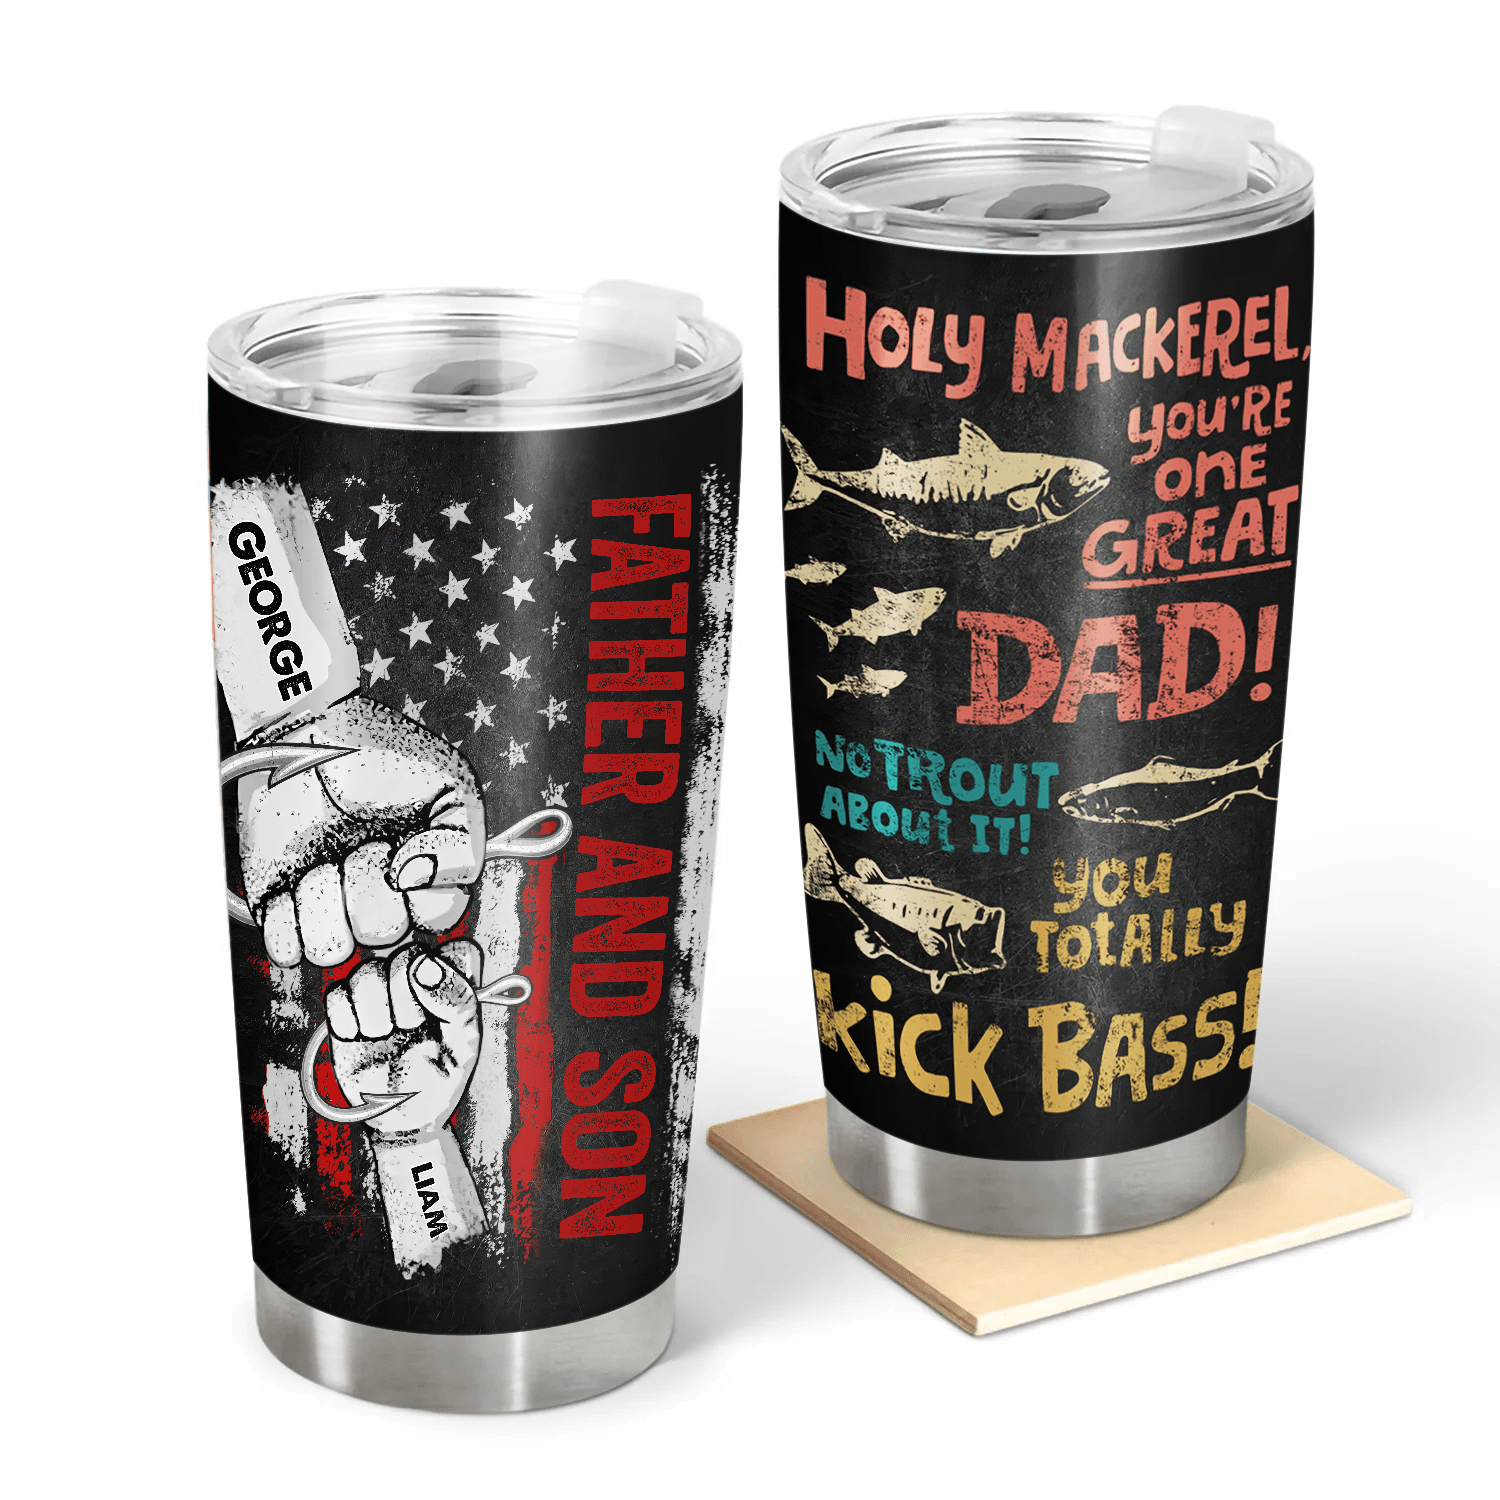 We Hooked The Best Dad Raised Fist Bump - Personalized Custom 20oz Fat Tumbler Cup - Father's Day Funny Gift for Dad, Grandpa, Daddy, Dada, Husband, Fishing, Reel Cool Dad - Suzitee Store